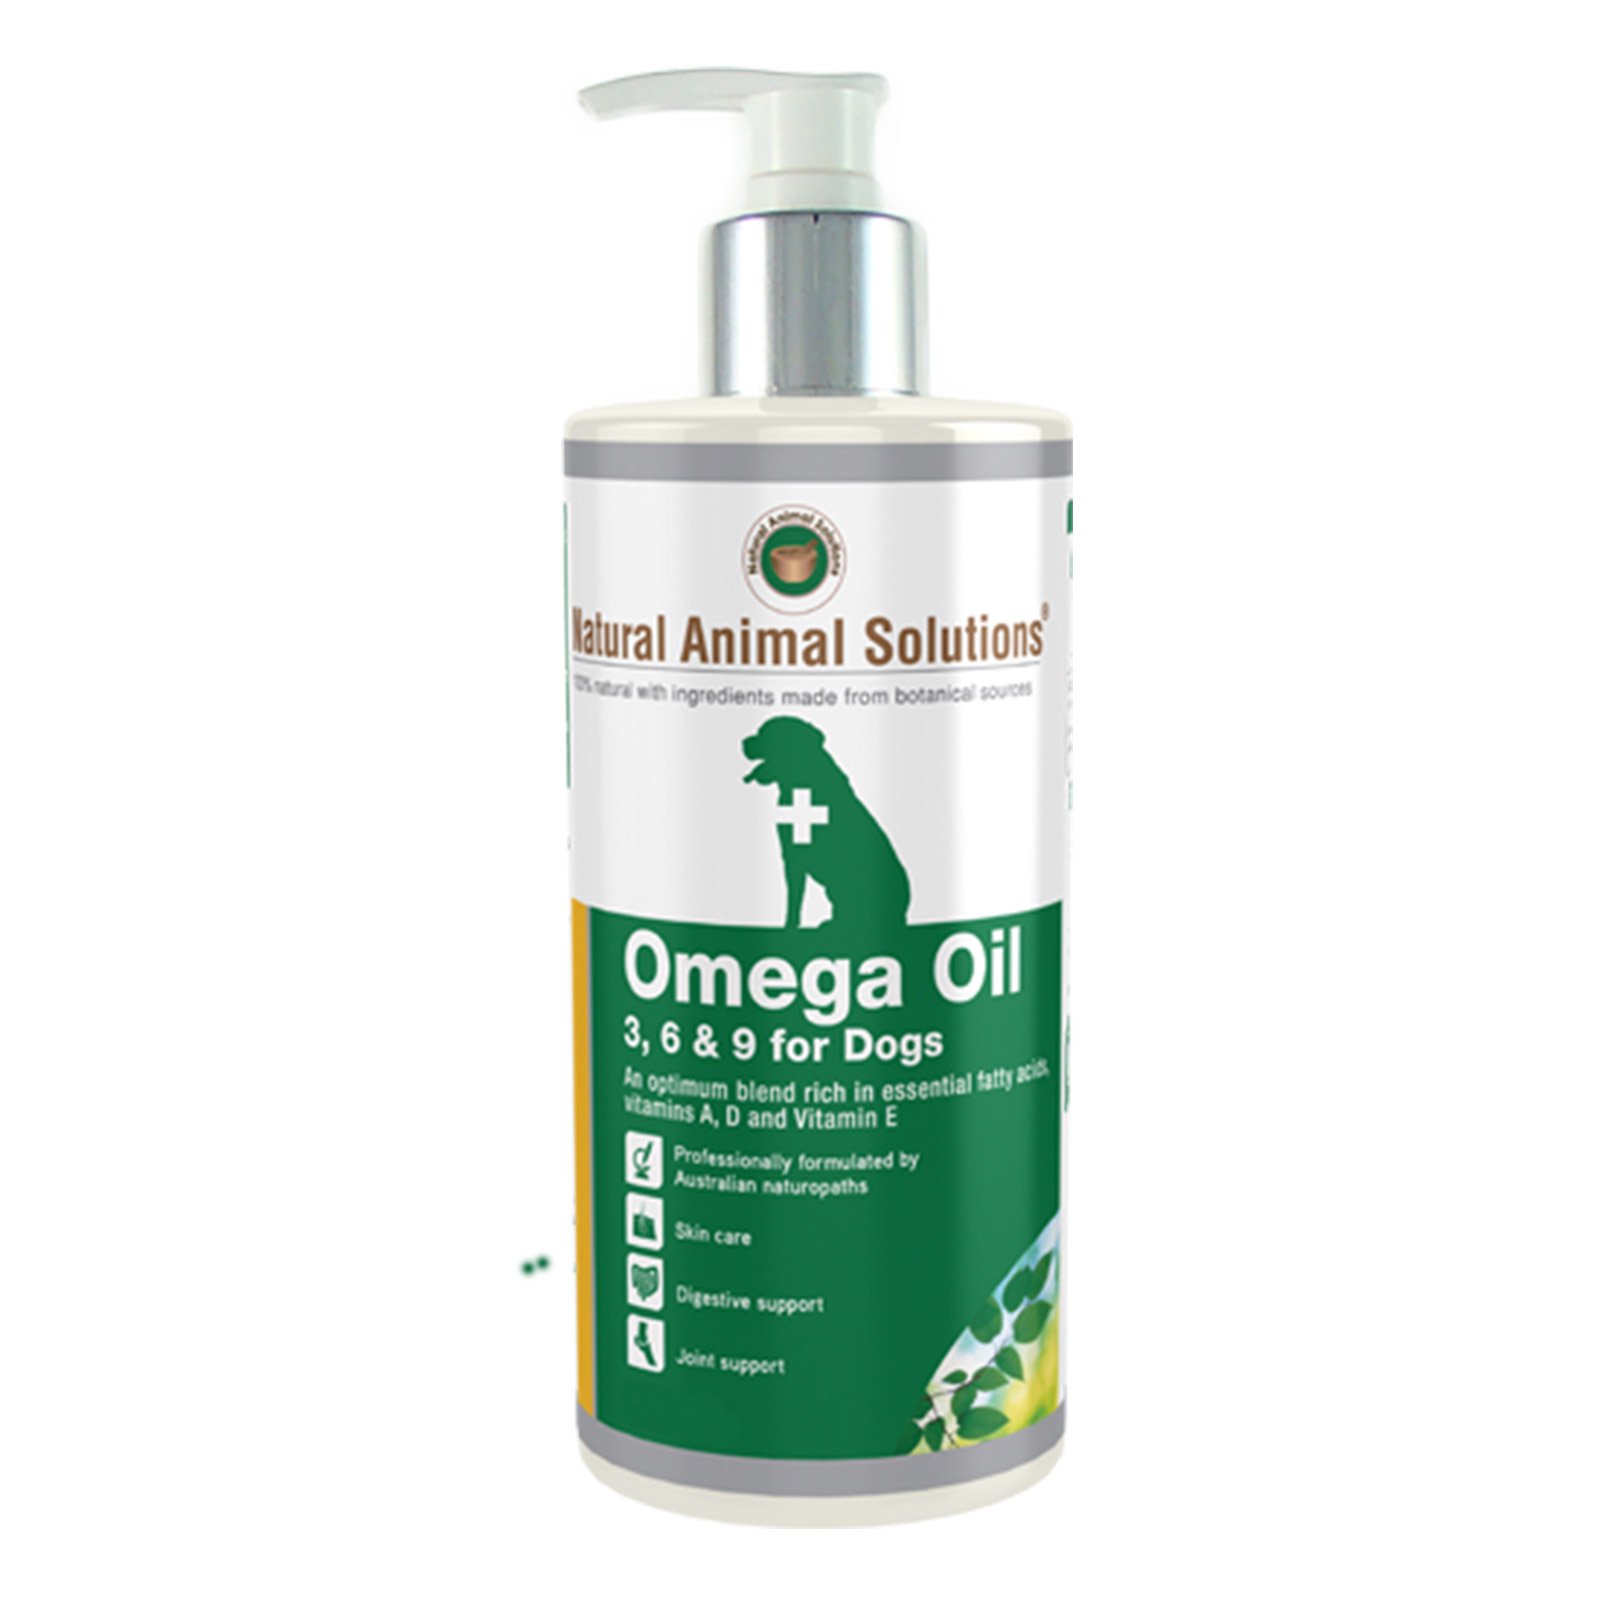 Natural Animal Solutions Omega 3,6 & 9 Oil